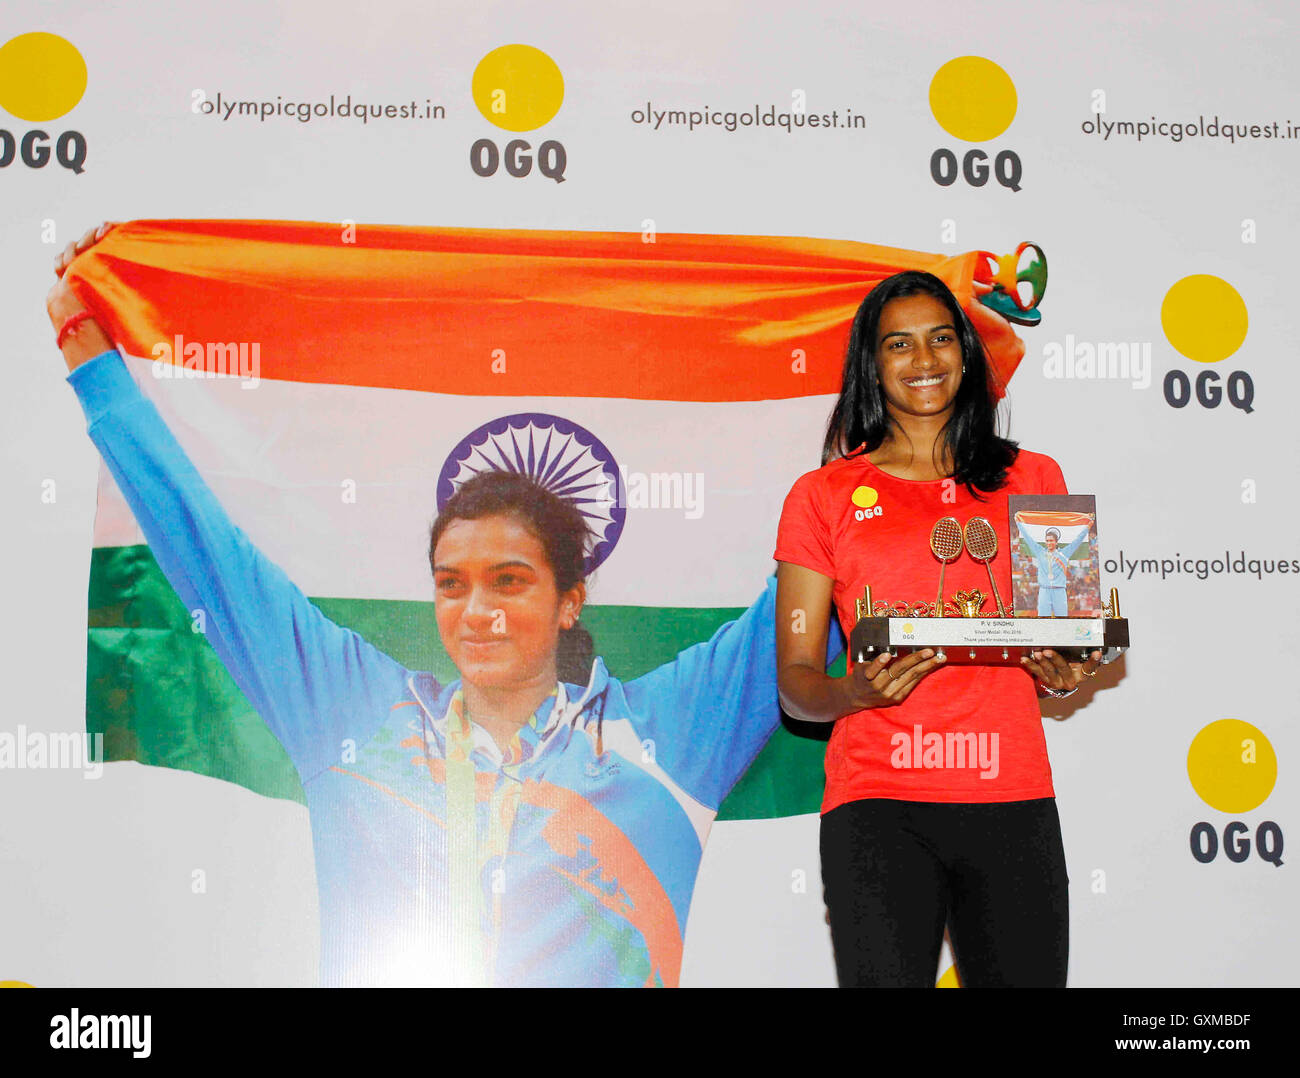 Indian badminton player Rio Olympics silver medallist P V Sindhu felicitation function organised Olympic Gold Quest Mumbai Stock Photo